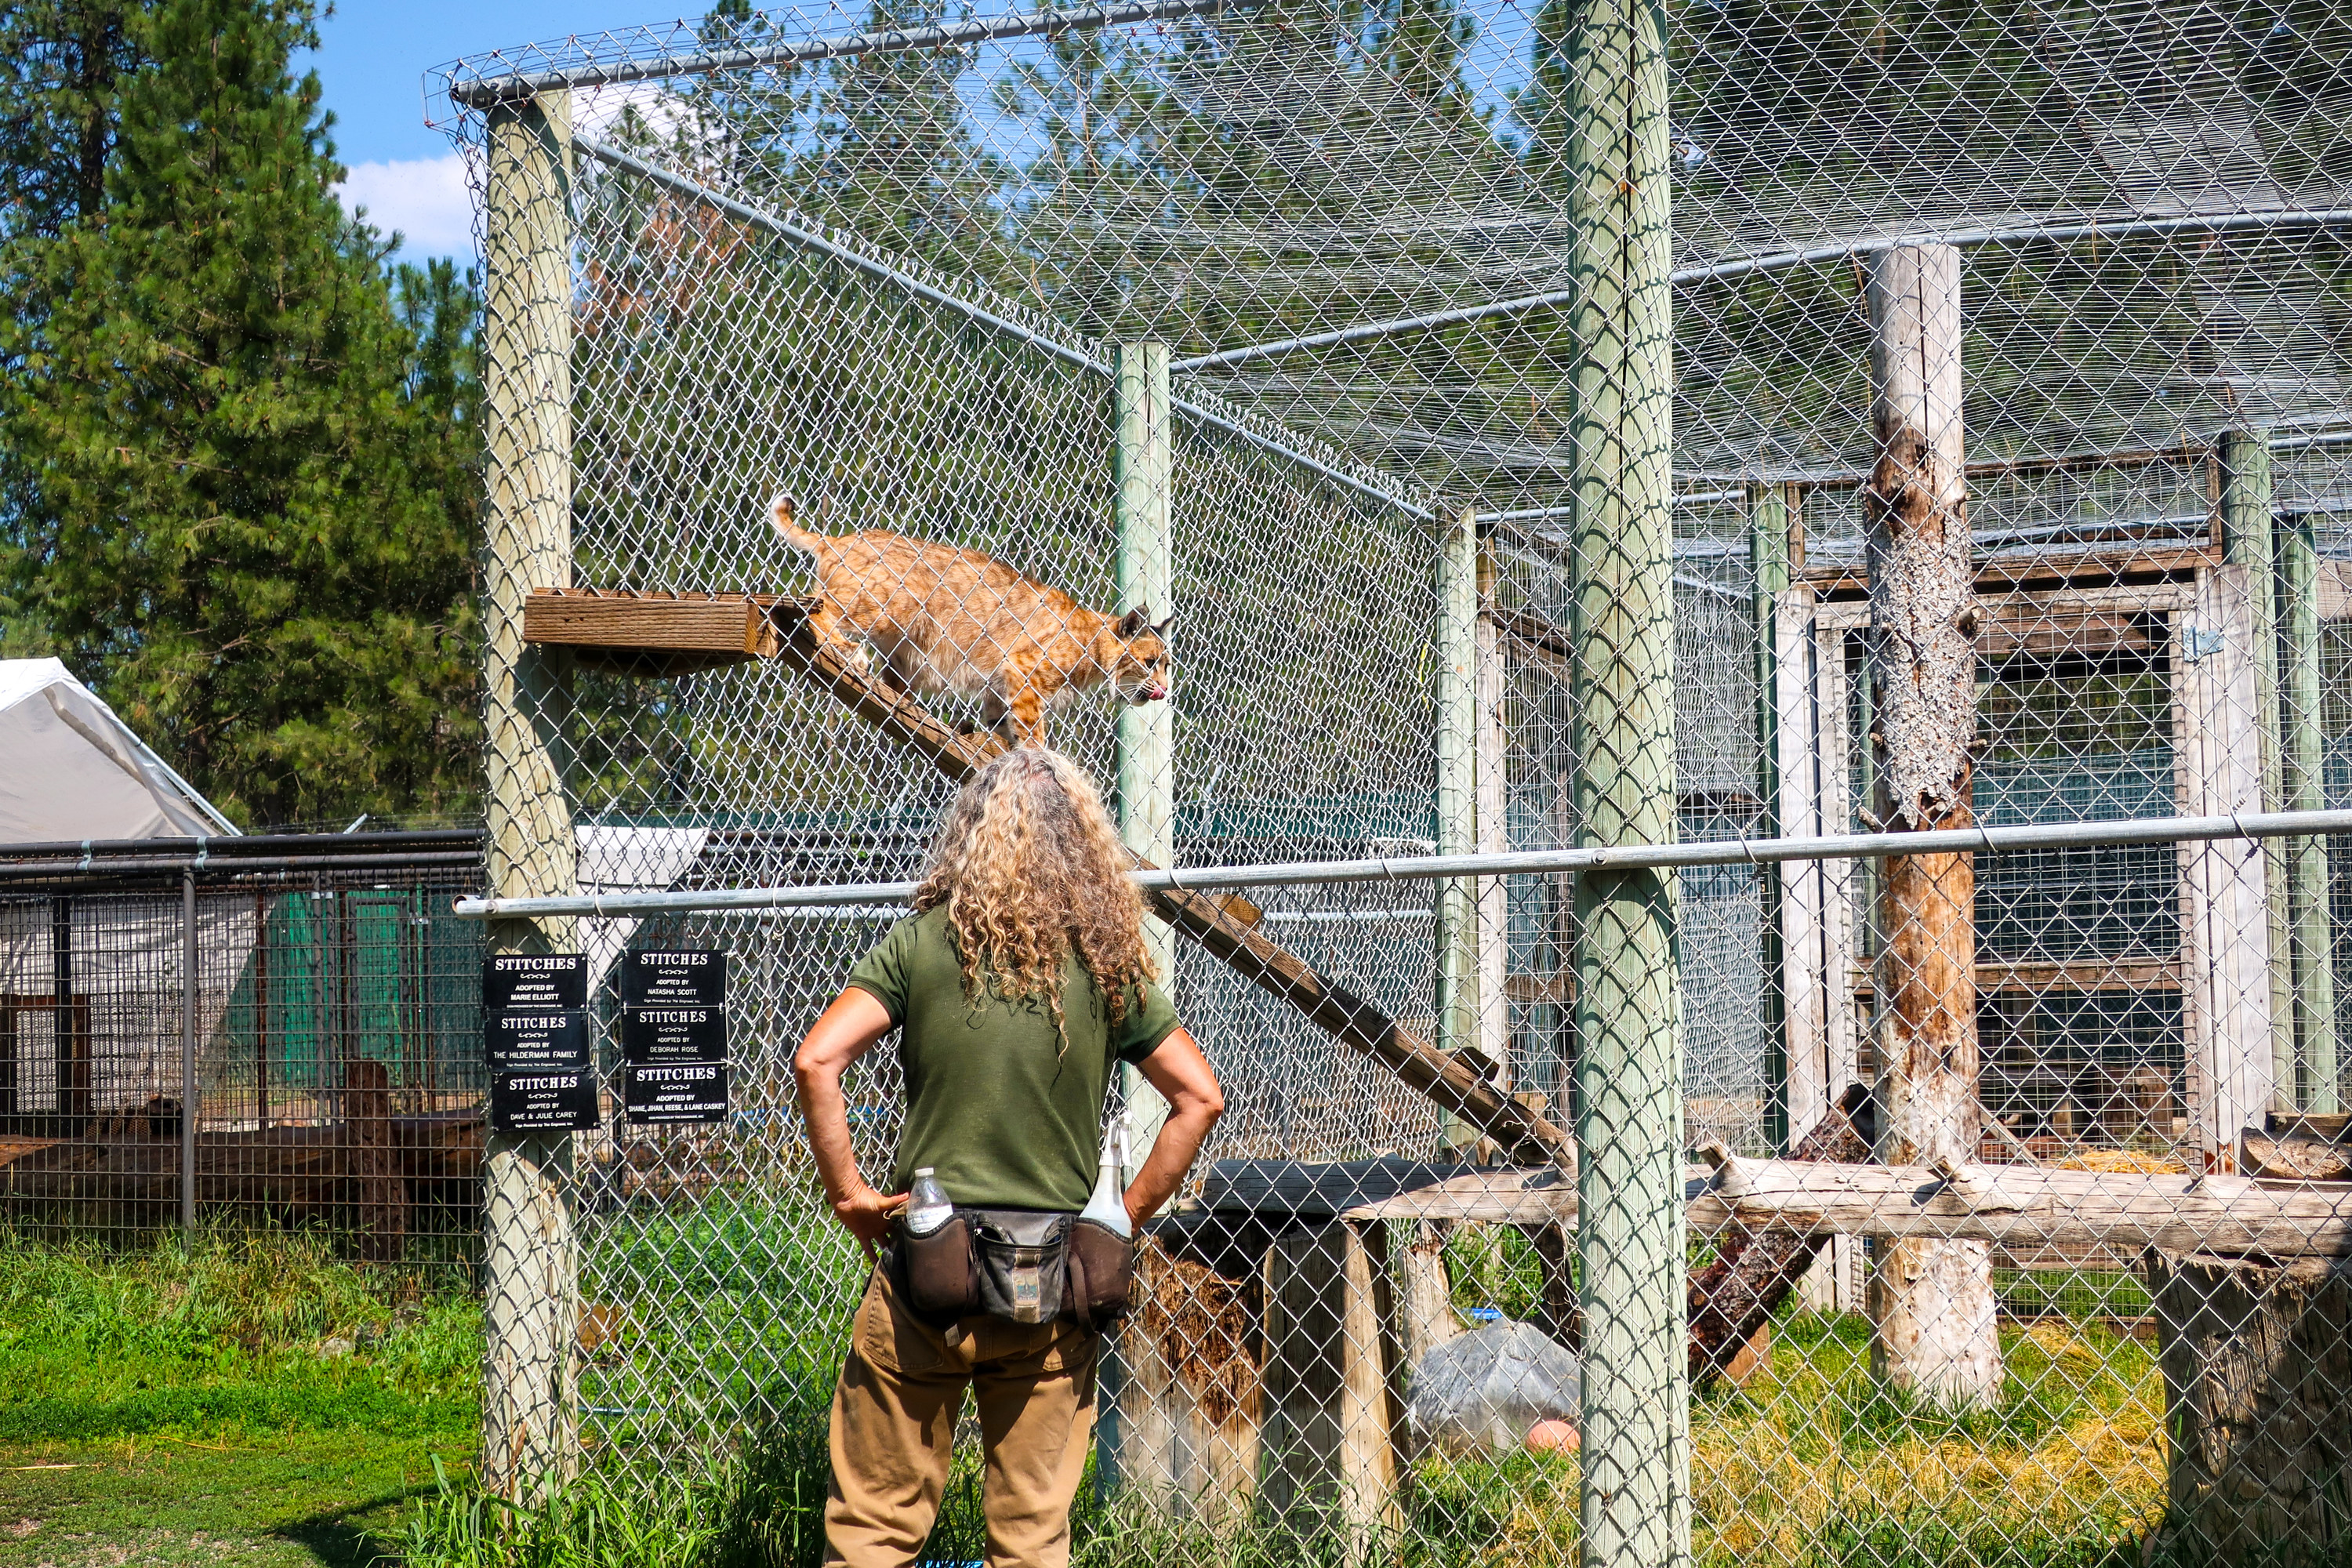 A zookeeper outside a cage at the zoo